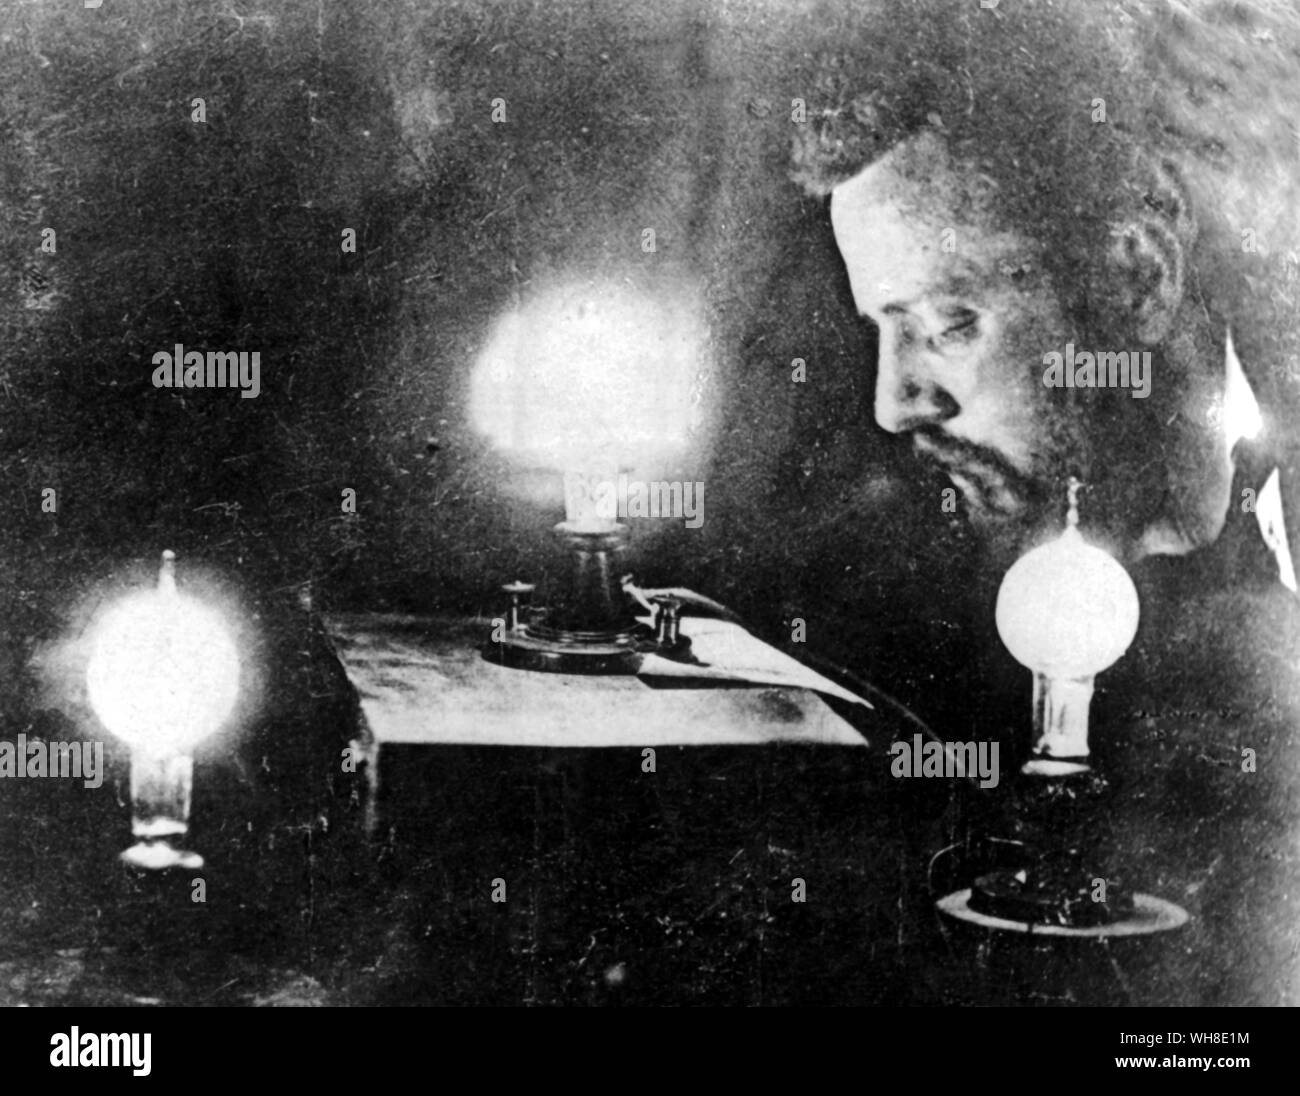 Charles Batchelor (1845-1910). The first photograph ever taken by incandescent electric lamps, 1883. Charles Batchelor was an inventor and close associate of American inventor, Thomas Alva Edison. He was involved in some of the greatest inventions and technological developments in history.. . . . Stock Photo